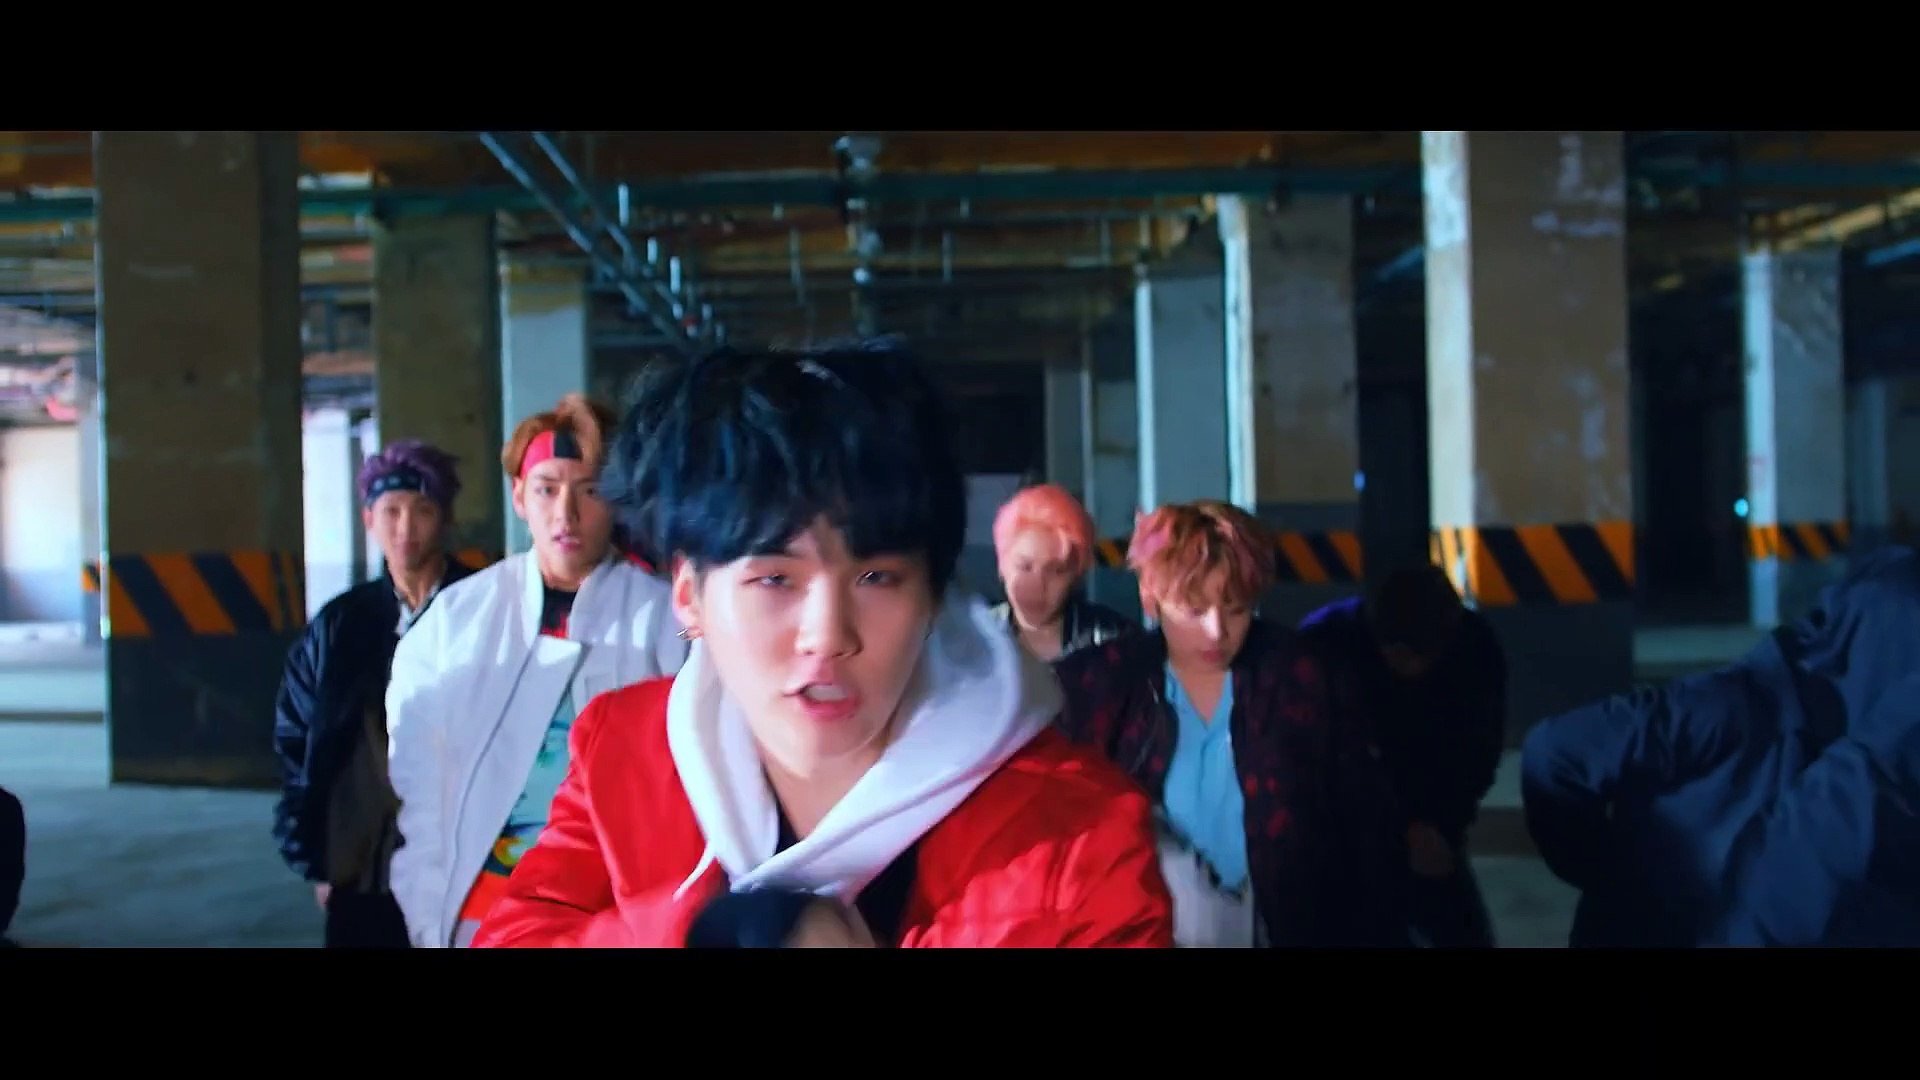 Bts (방탄소년단) 'Not Today' Official Mv - Video Dailymotion